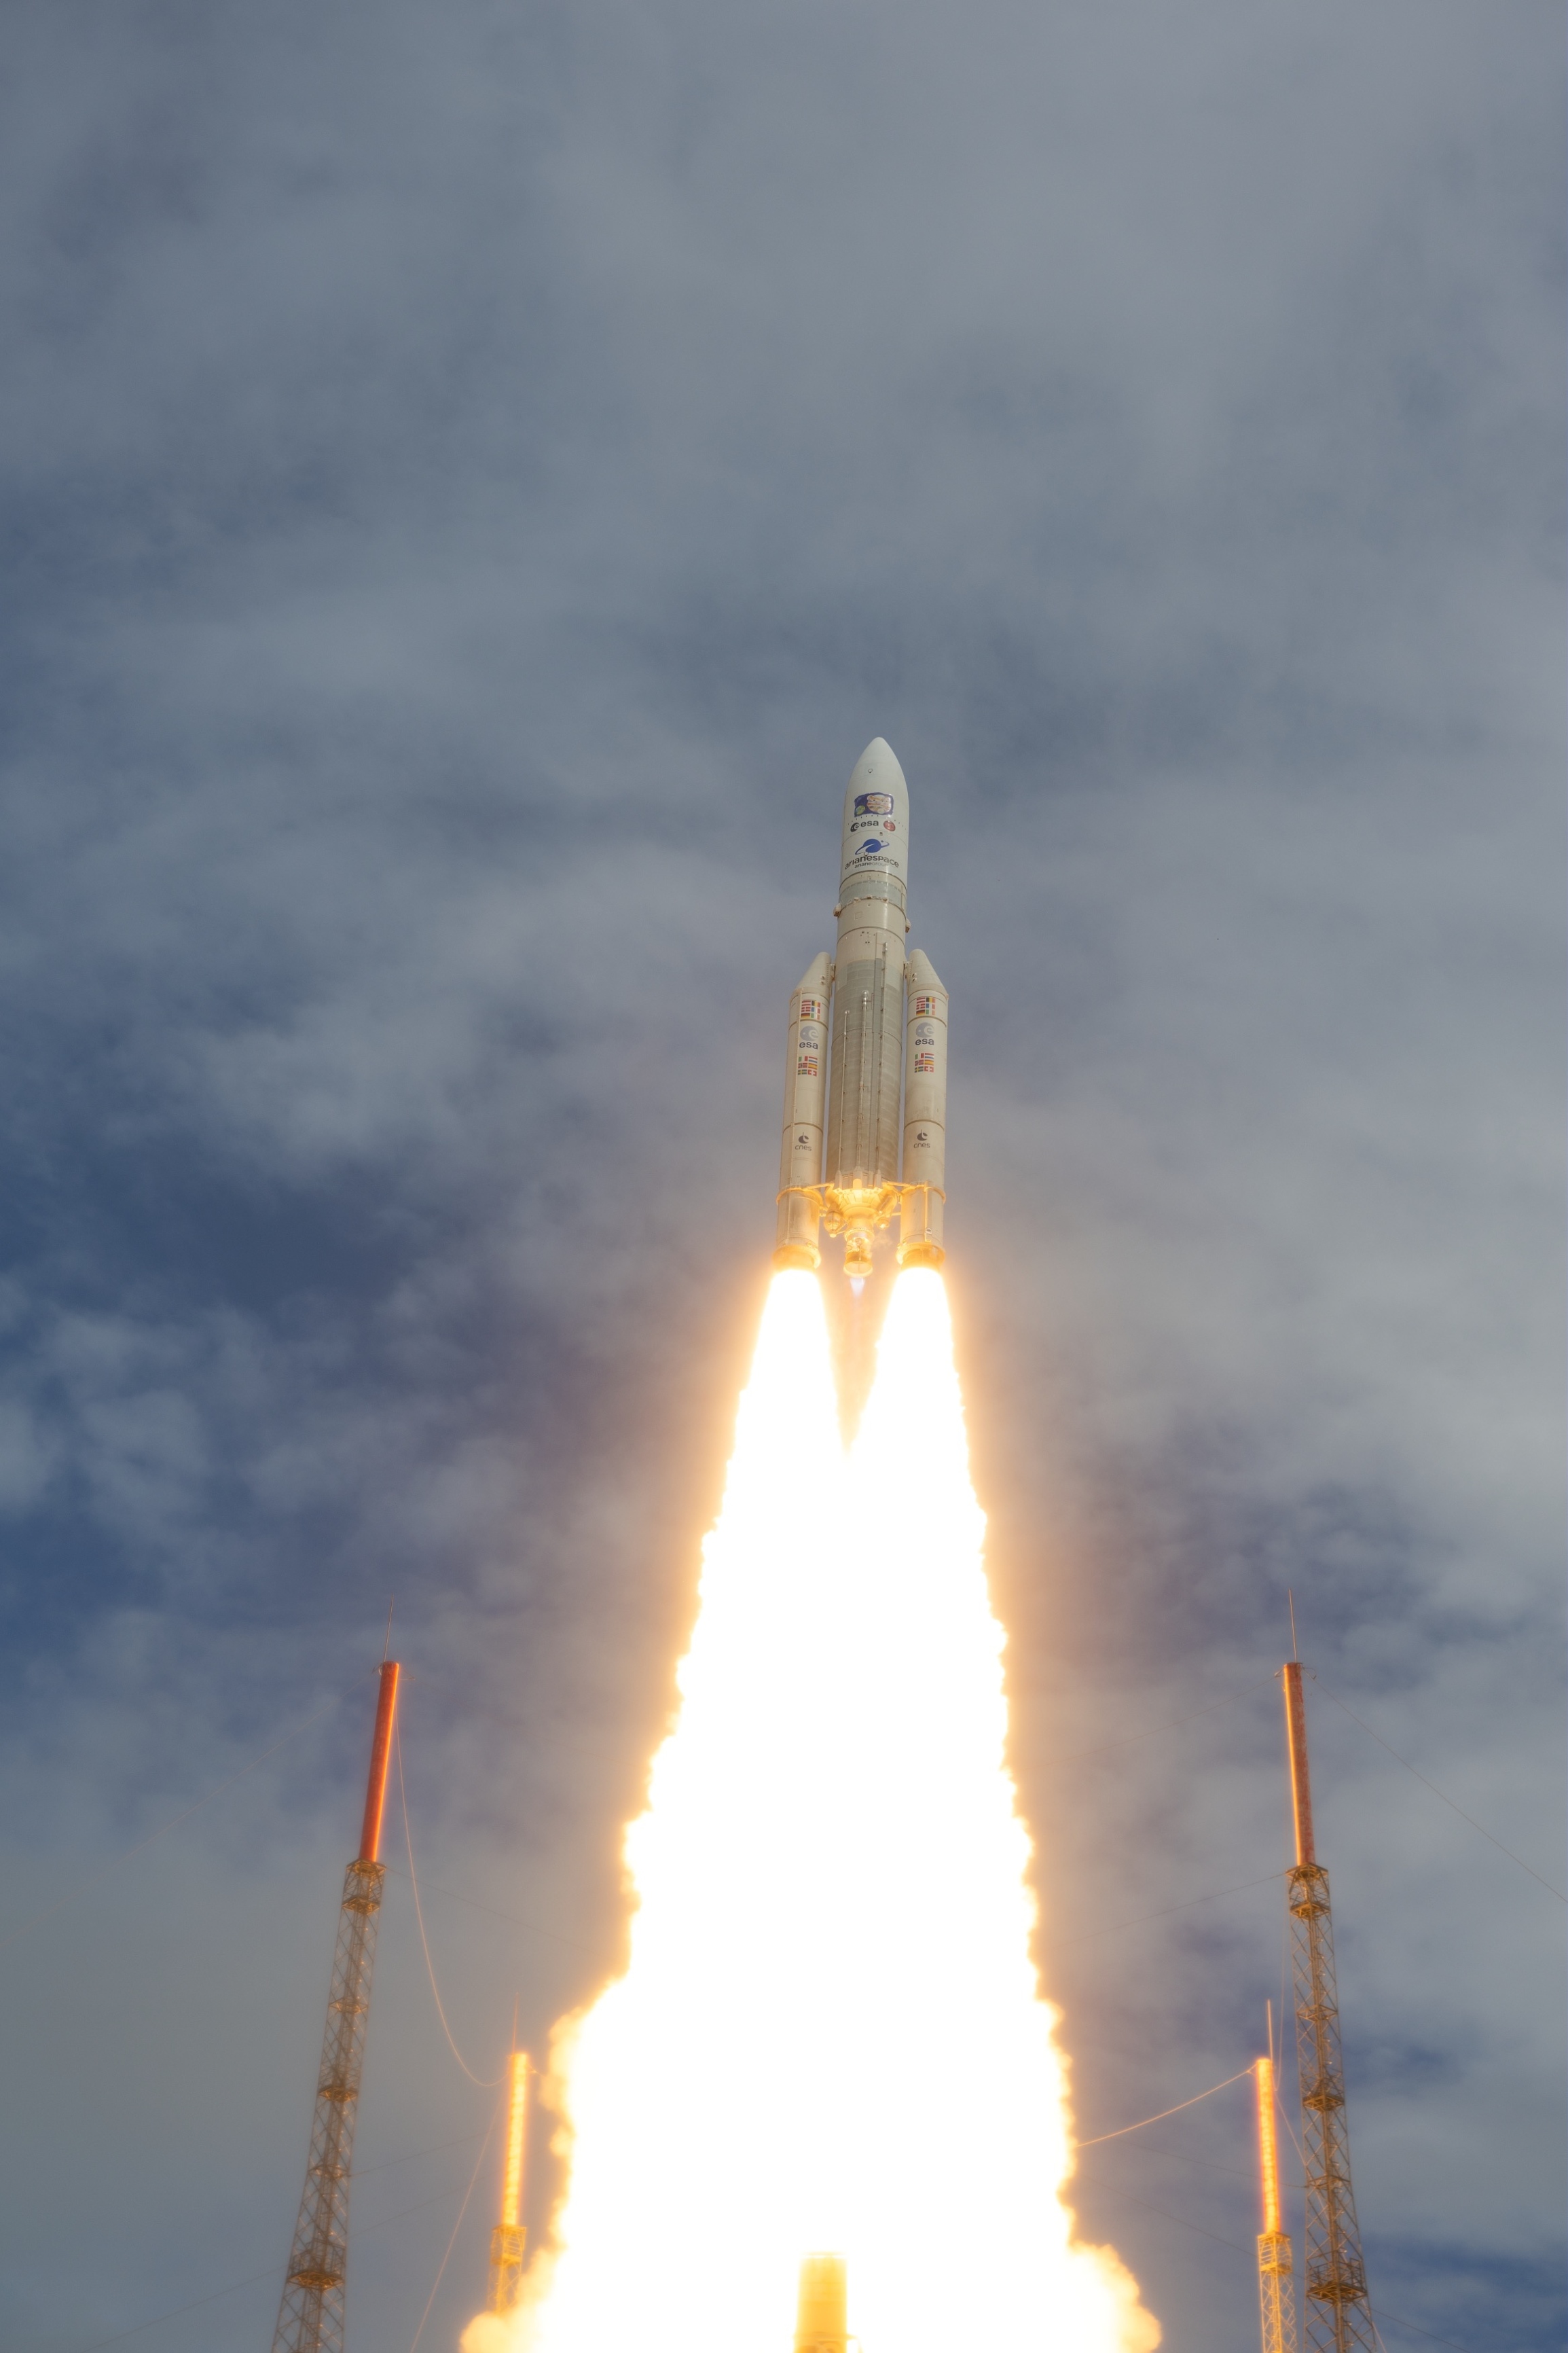 Launch of the JUICE spacecraft with an Ariane 5 rocket in April 2023